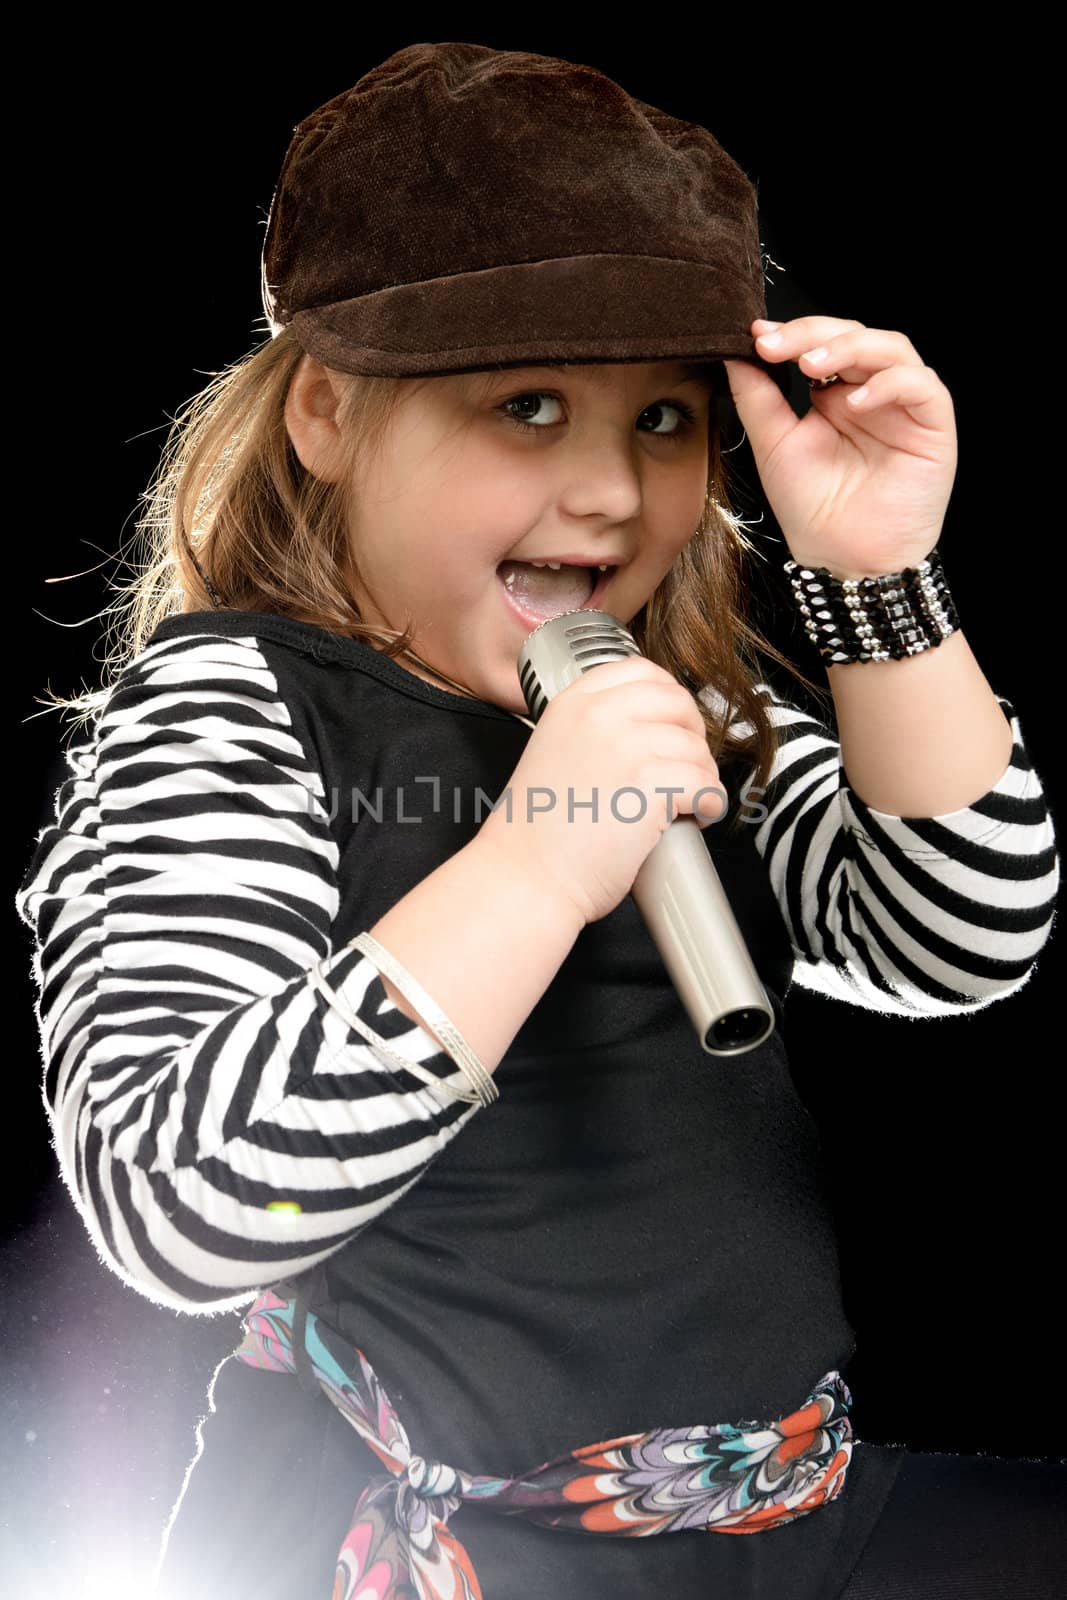 A stylish little girl is sing into a microphone, shot with a backlight